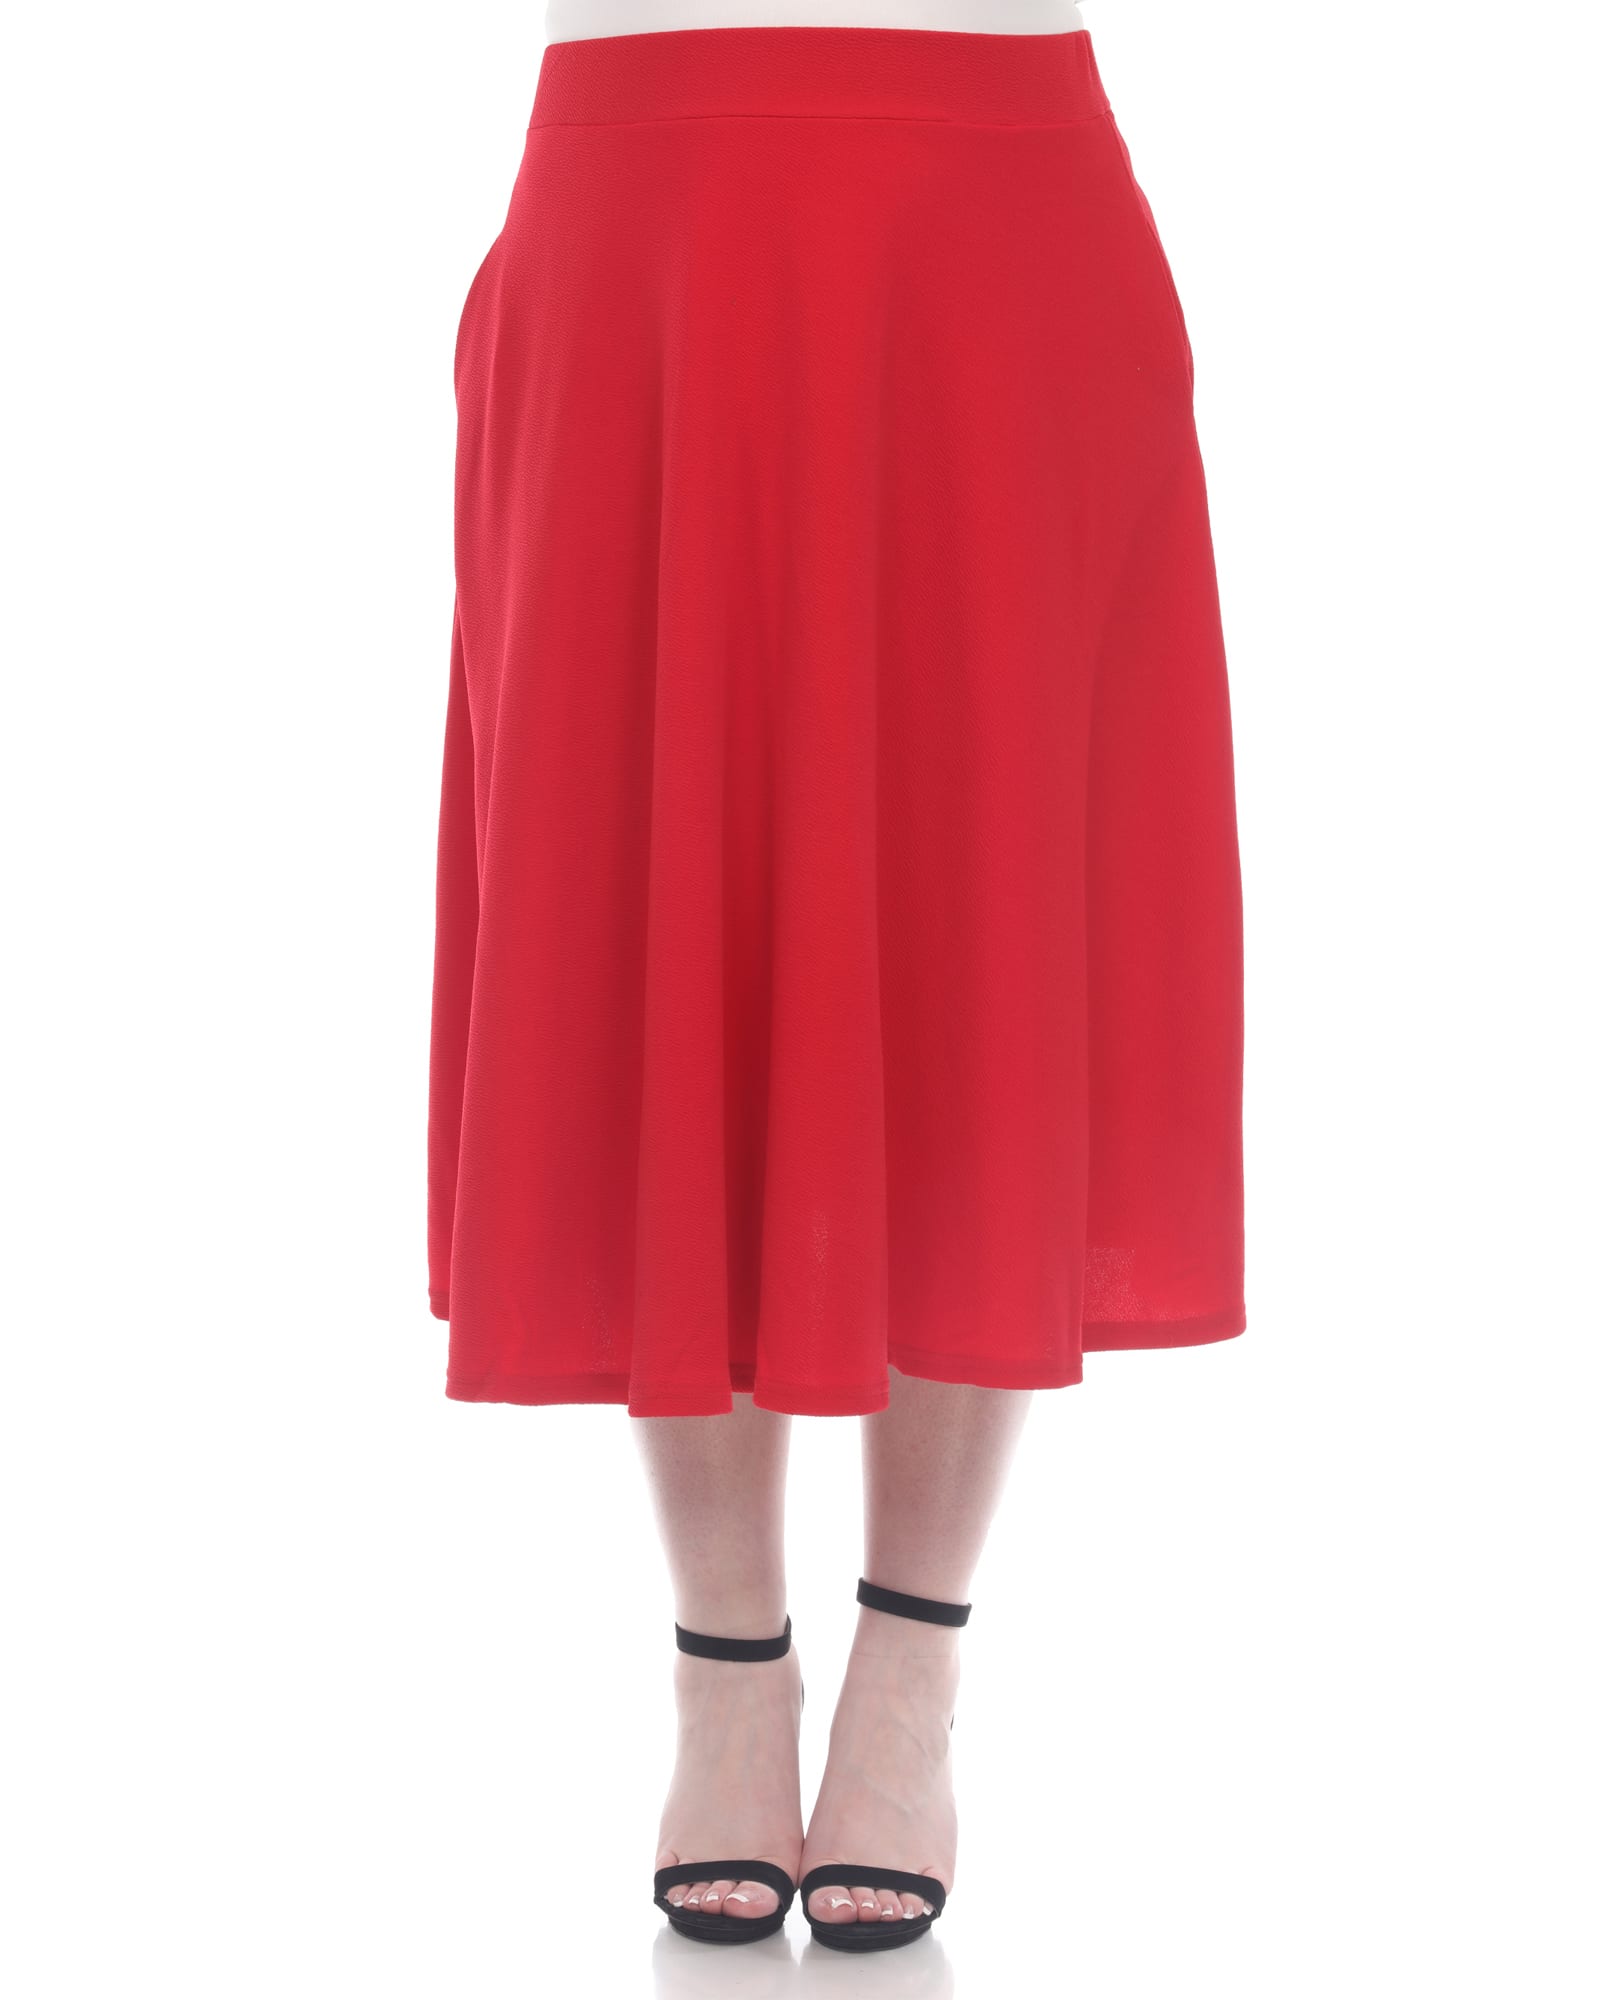 Red Skirts For Women